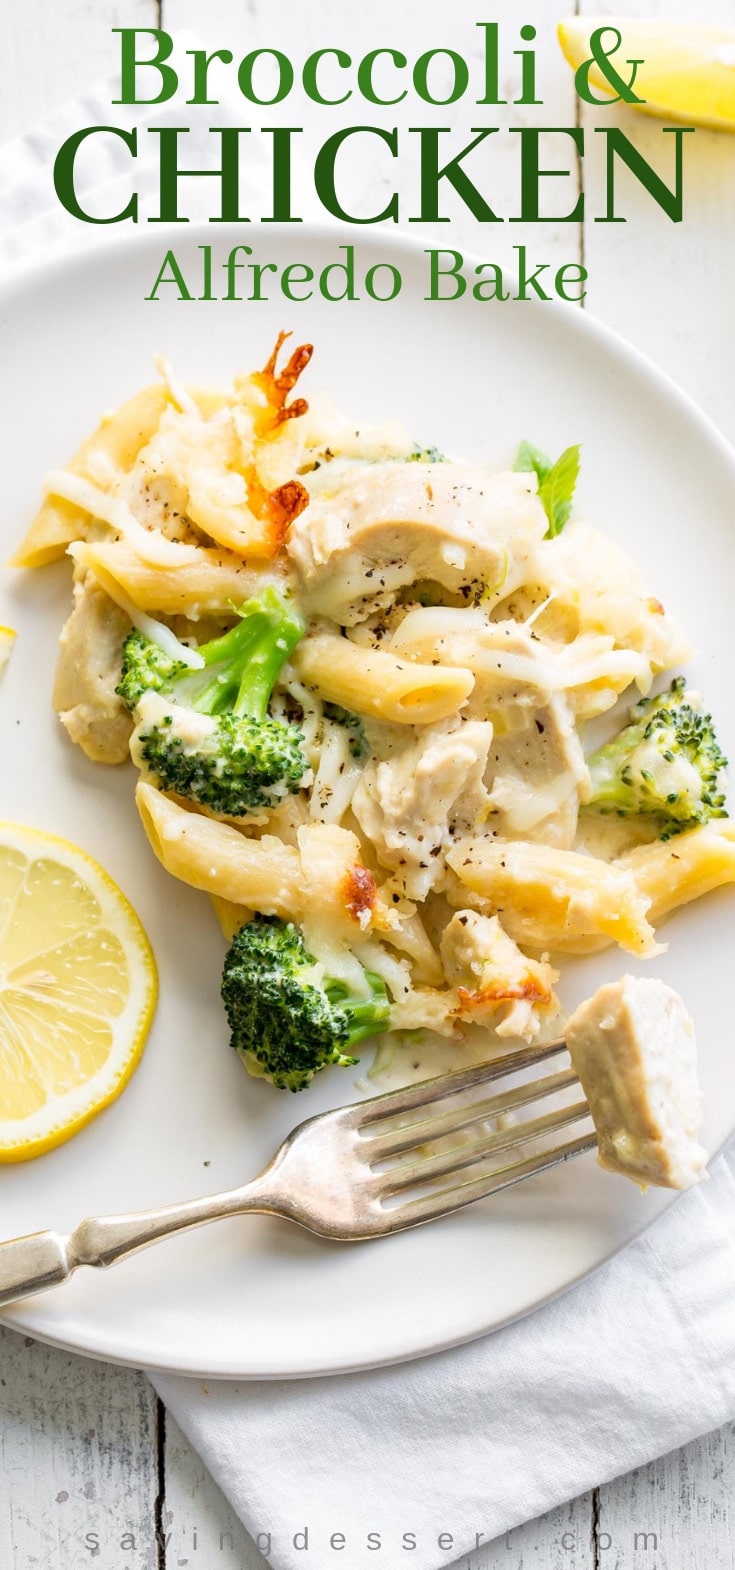 A plate with broccoli and chicken Alfredo with slices of lemon on the side